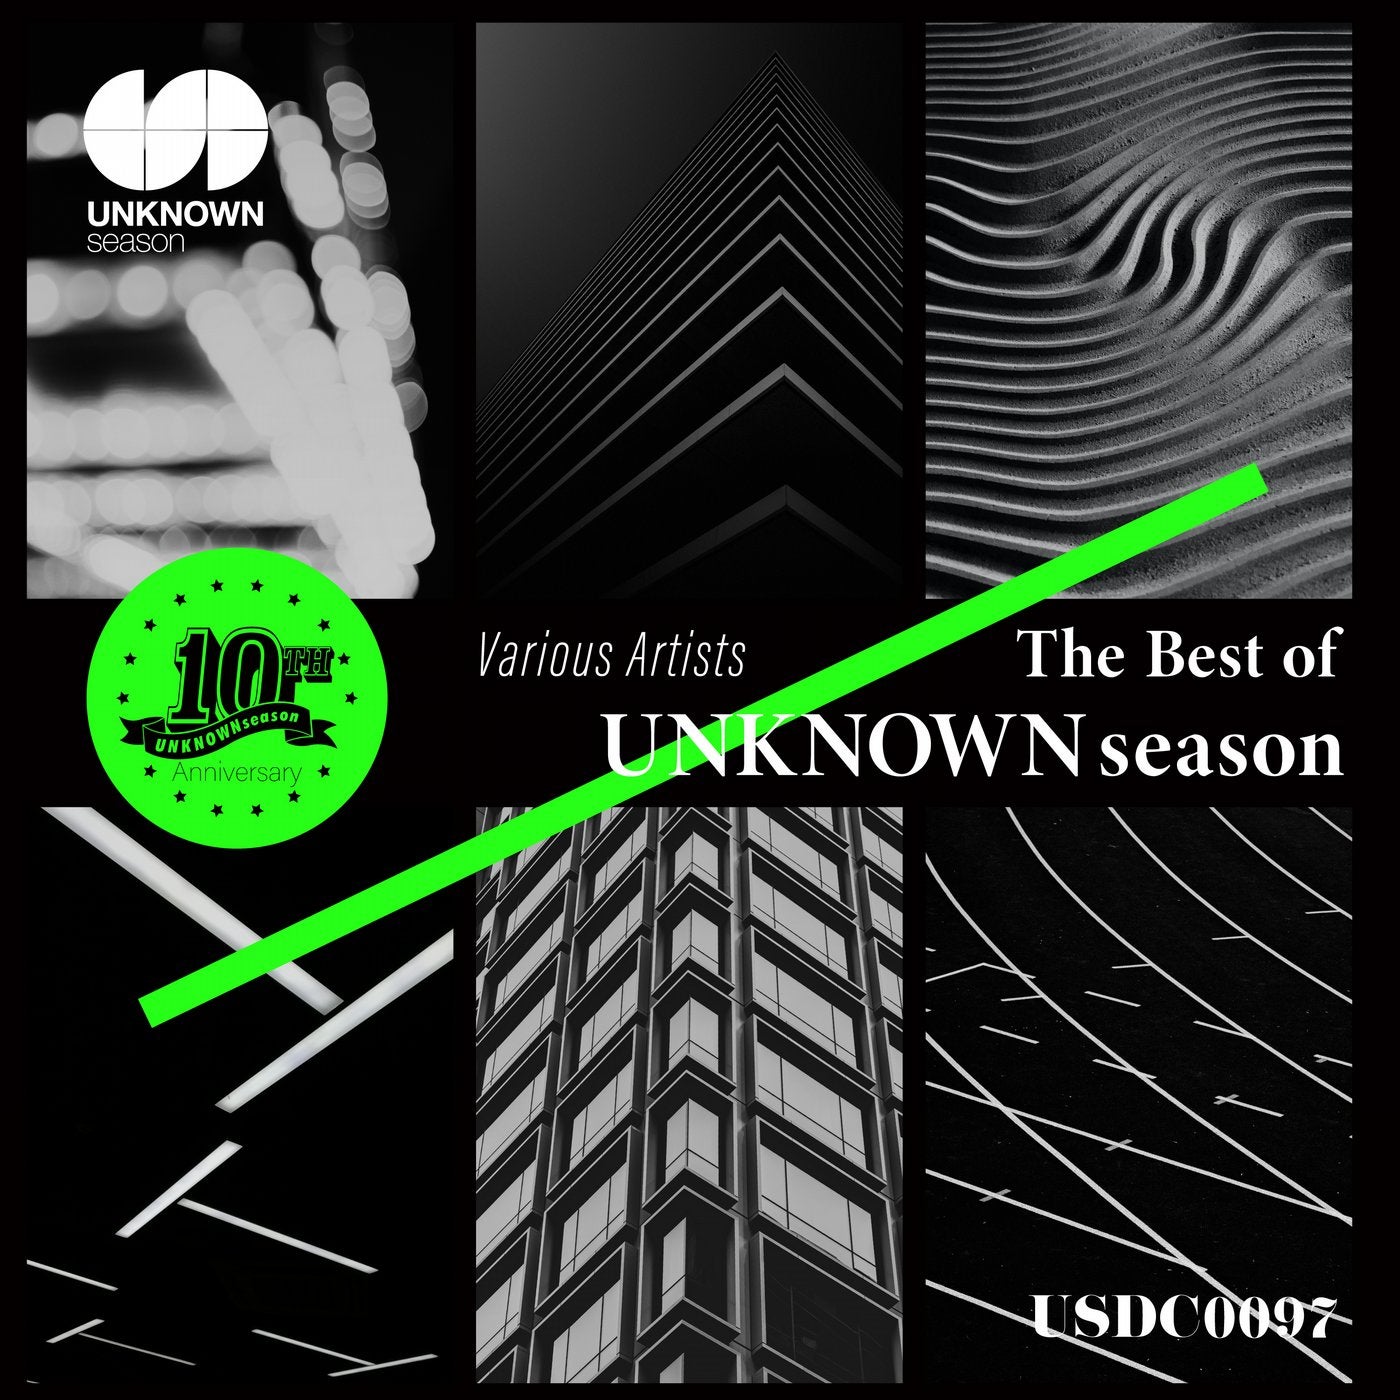 The Best of UNKNOWN season